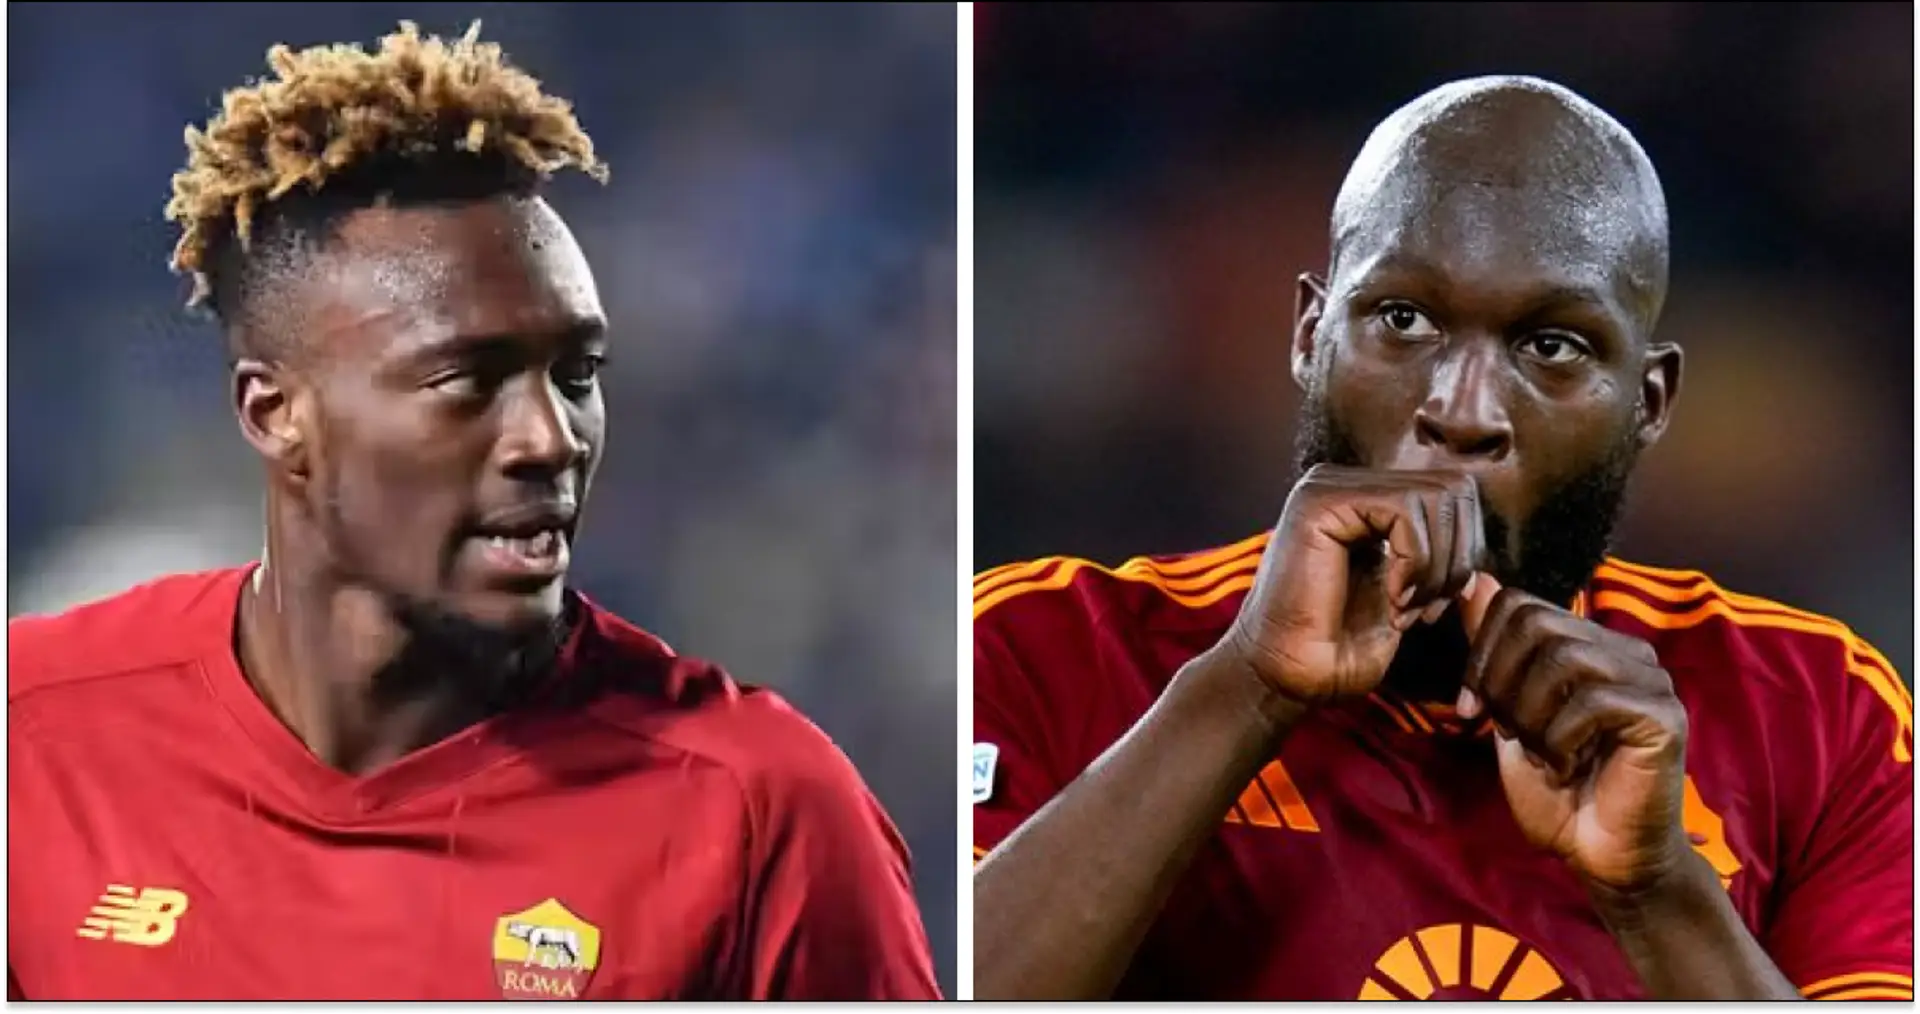 Roma want to offer Abraham to Chelsea in exchange for Lukaku (reliability: 3 stars)